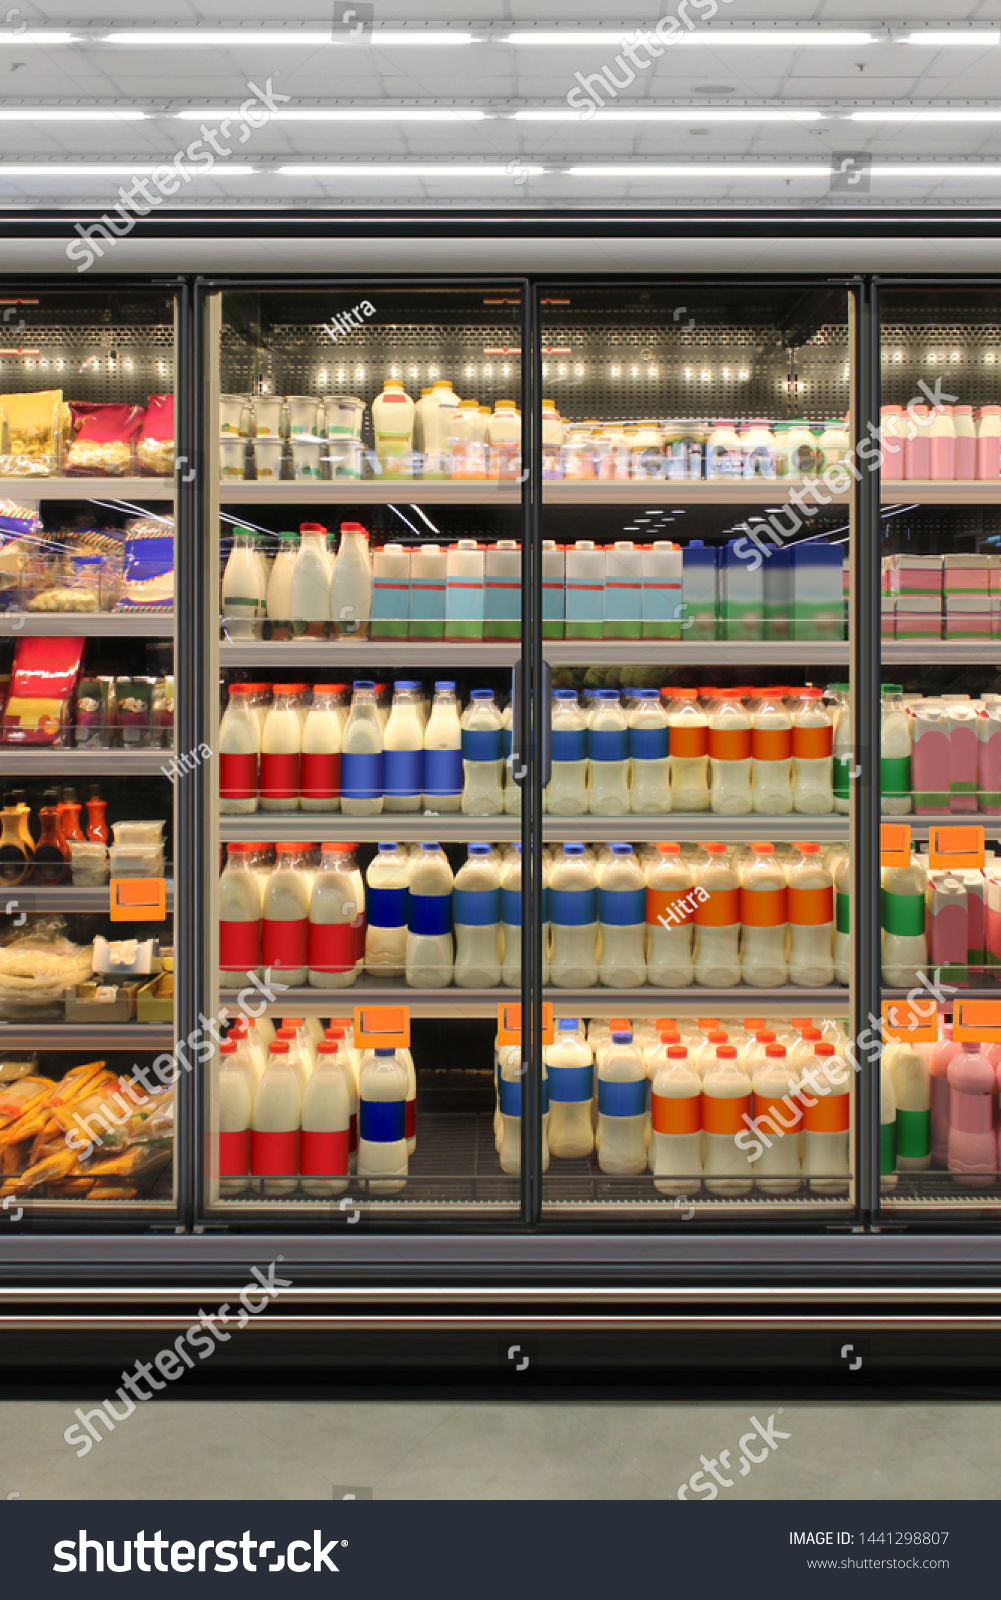 Dairy product in Glass door fridge Horizontal photo mockup yogurt and milk and plastic diary bottles in vertical freezer at supermarket. Suitable for presenting new Dairy packaging or label design #1441298807